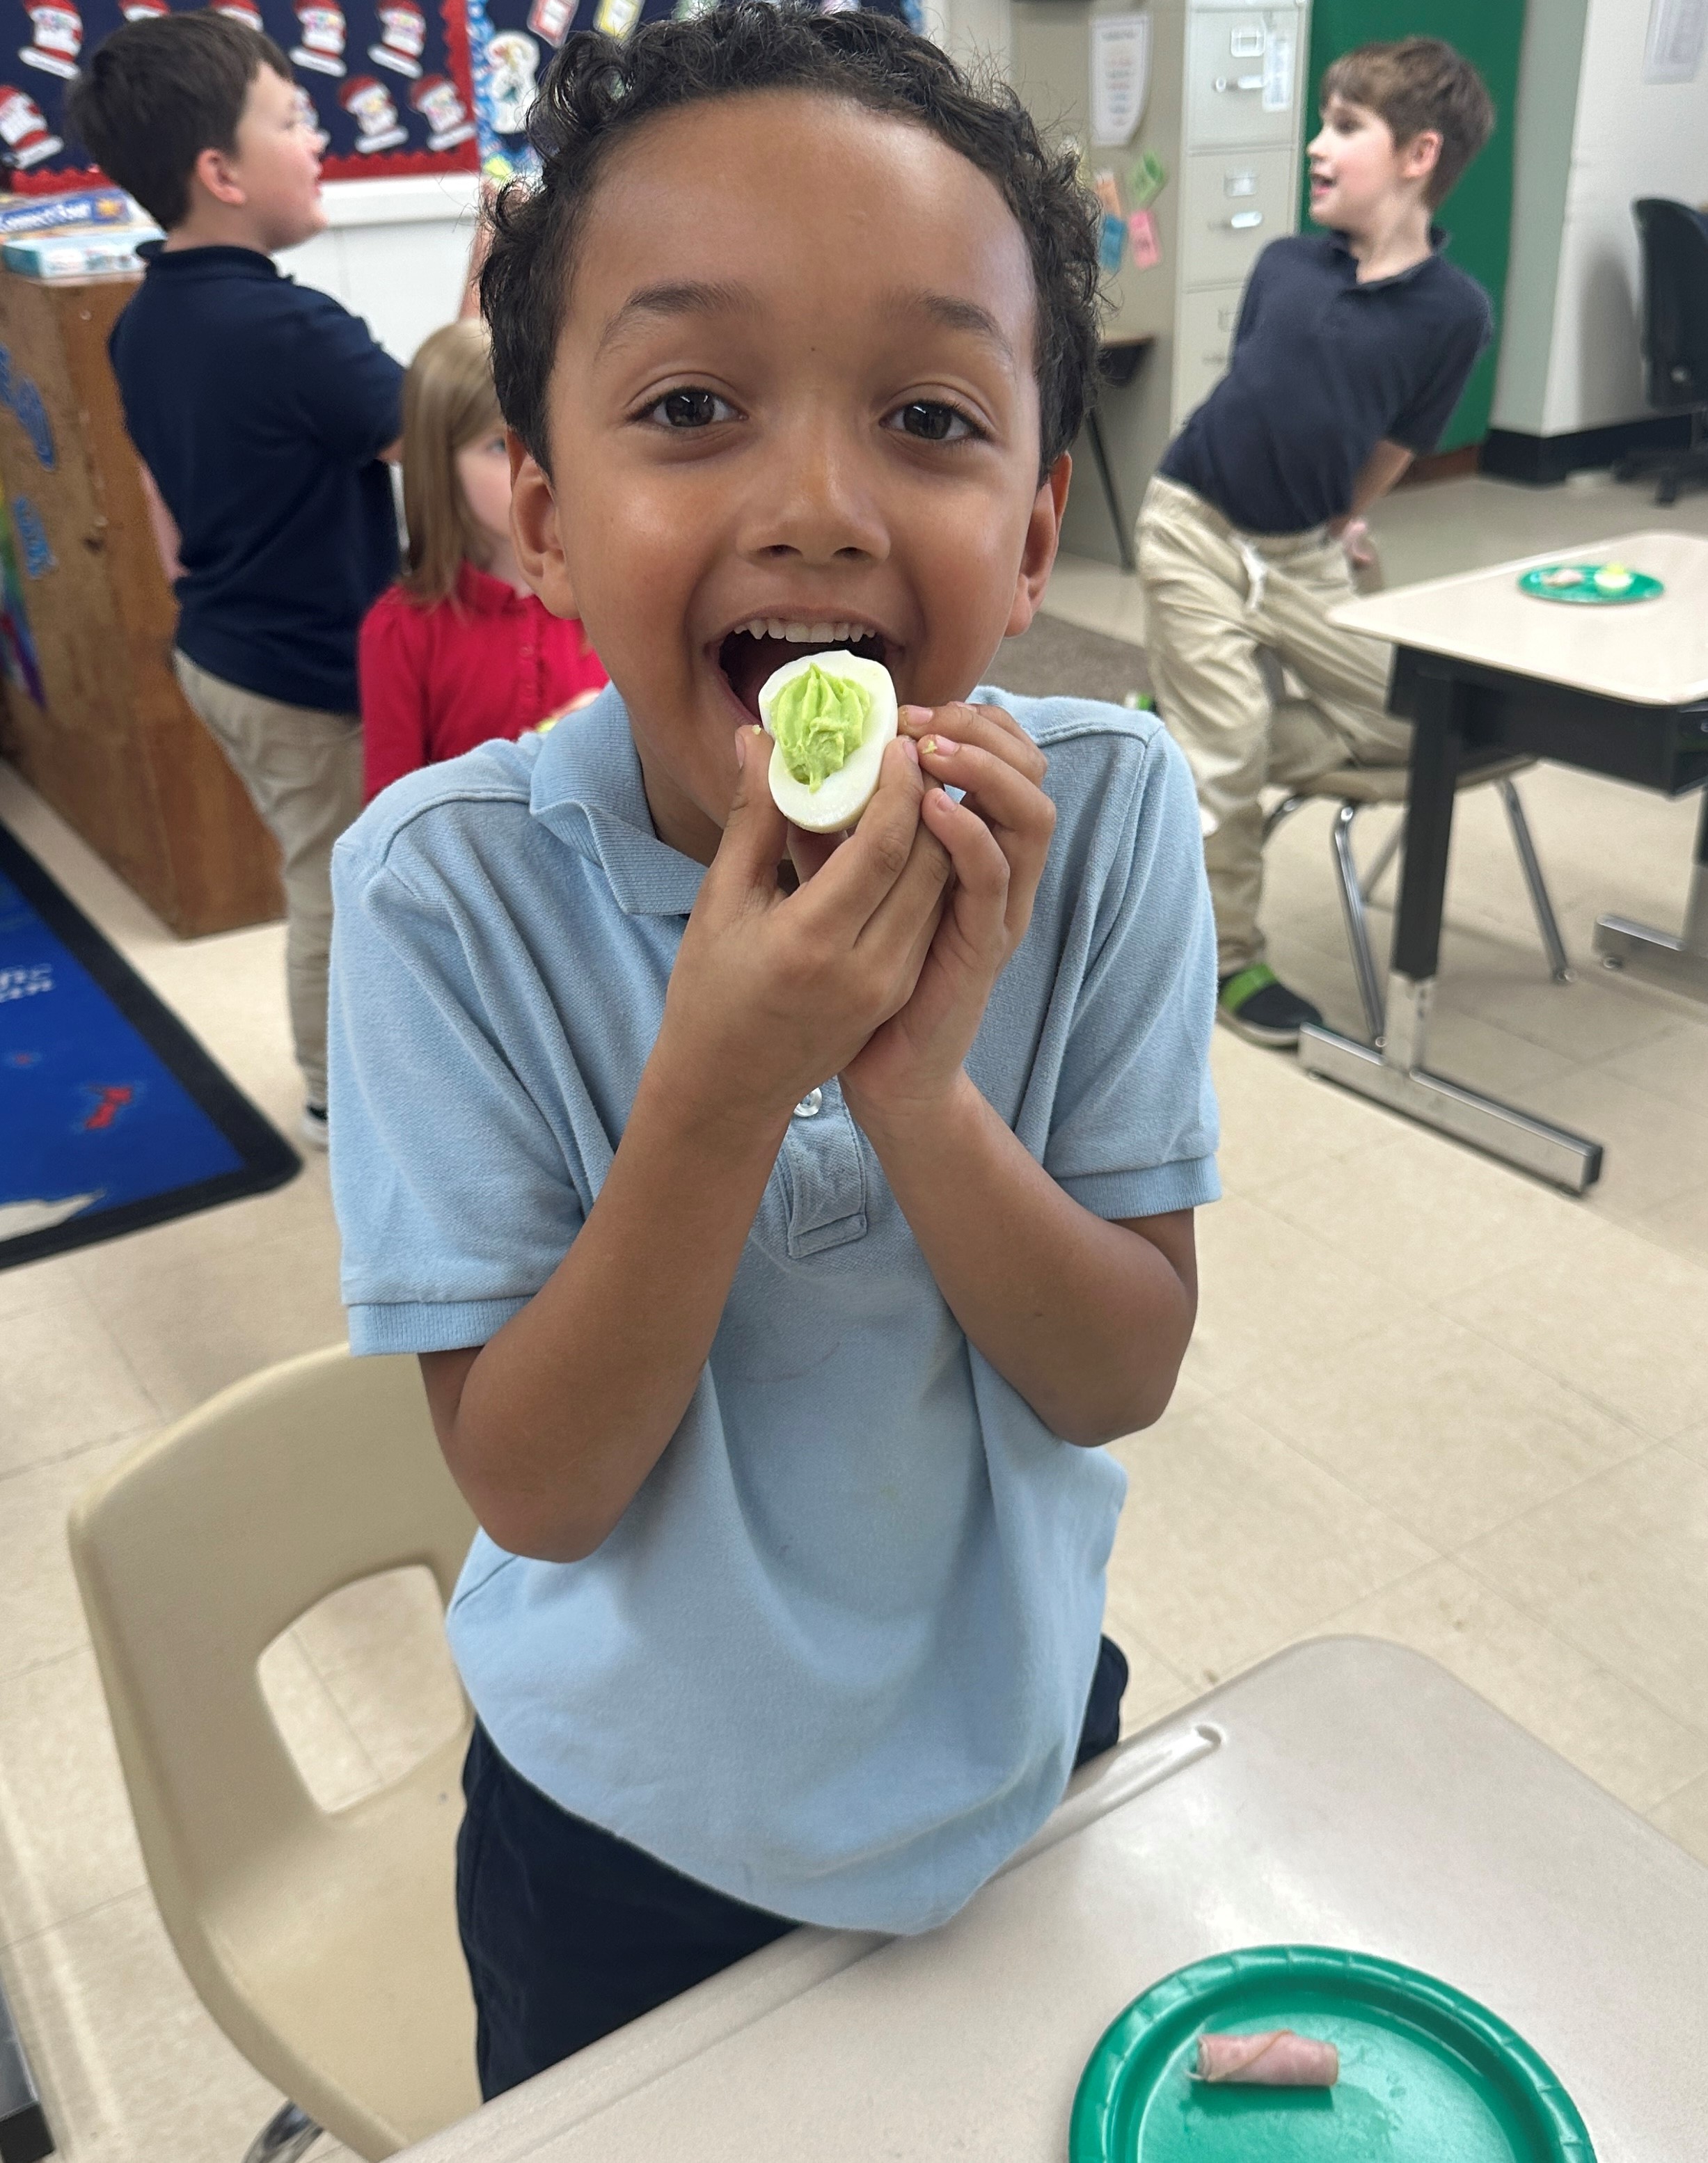 A student tries "green eggs" as part of their Read Across America lesson.